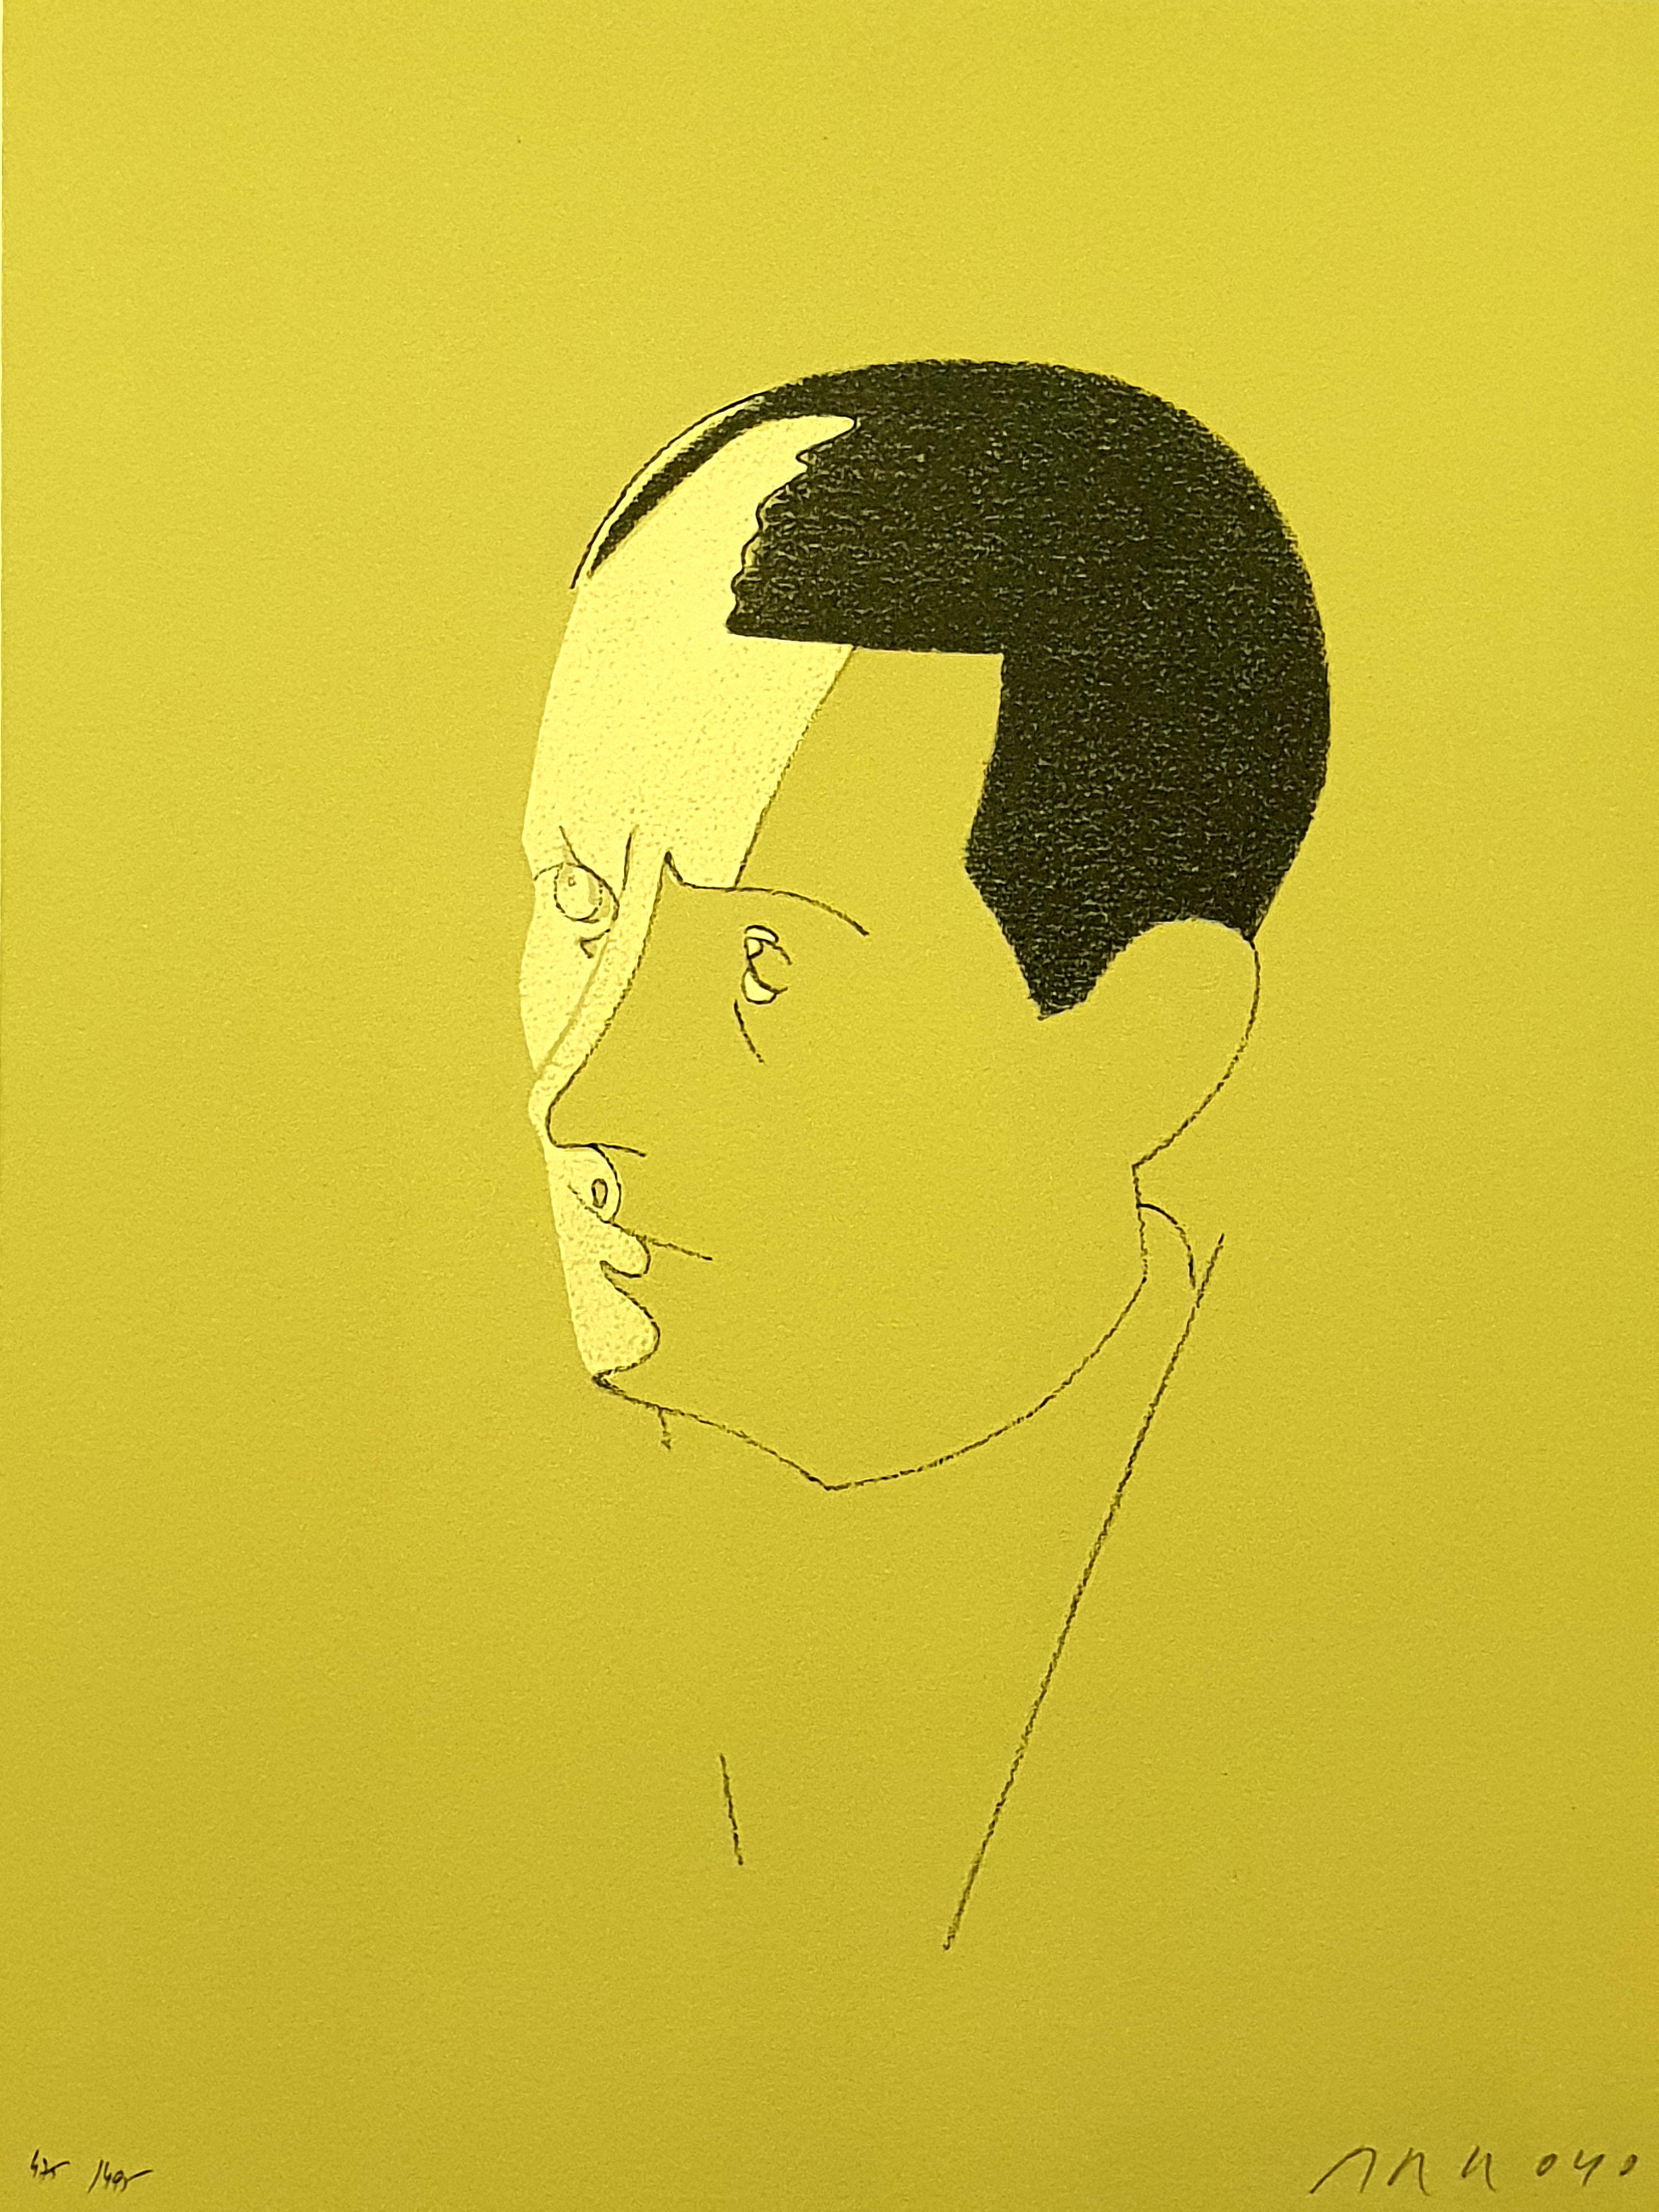 Eduardo Arroyo - Malraux - Original Lithograph
1984
Conditions: excellent
Edition: 495
Dimensions: 37.3 x 29 cm 
Handsigned and numbered
Editions:  Trinckvel